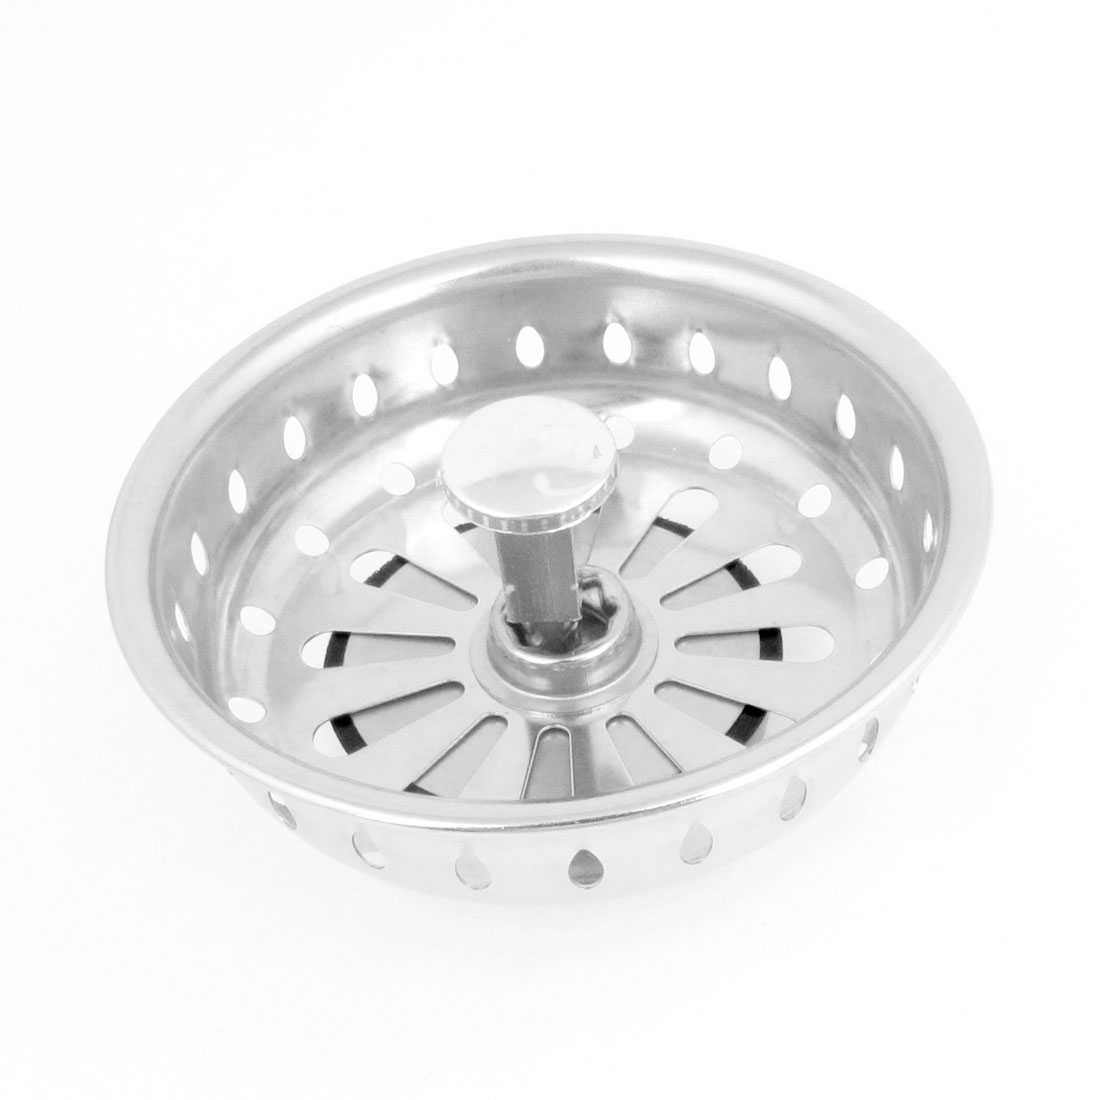 Unique Bargains 3.2' Dia Stainless Steel Sink Strainer Basket Drain Stopper for Kitchen